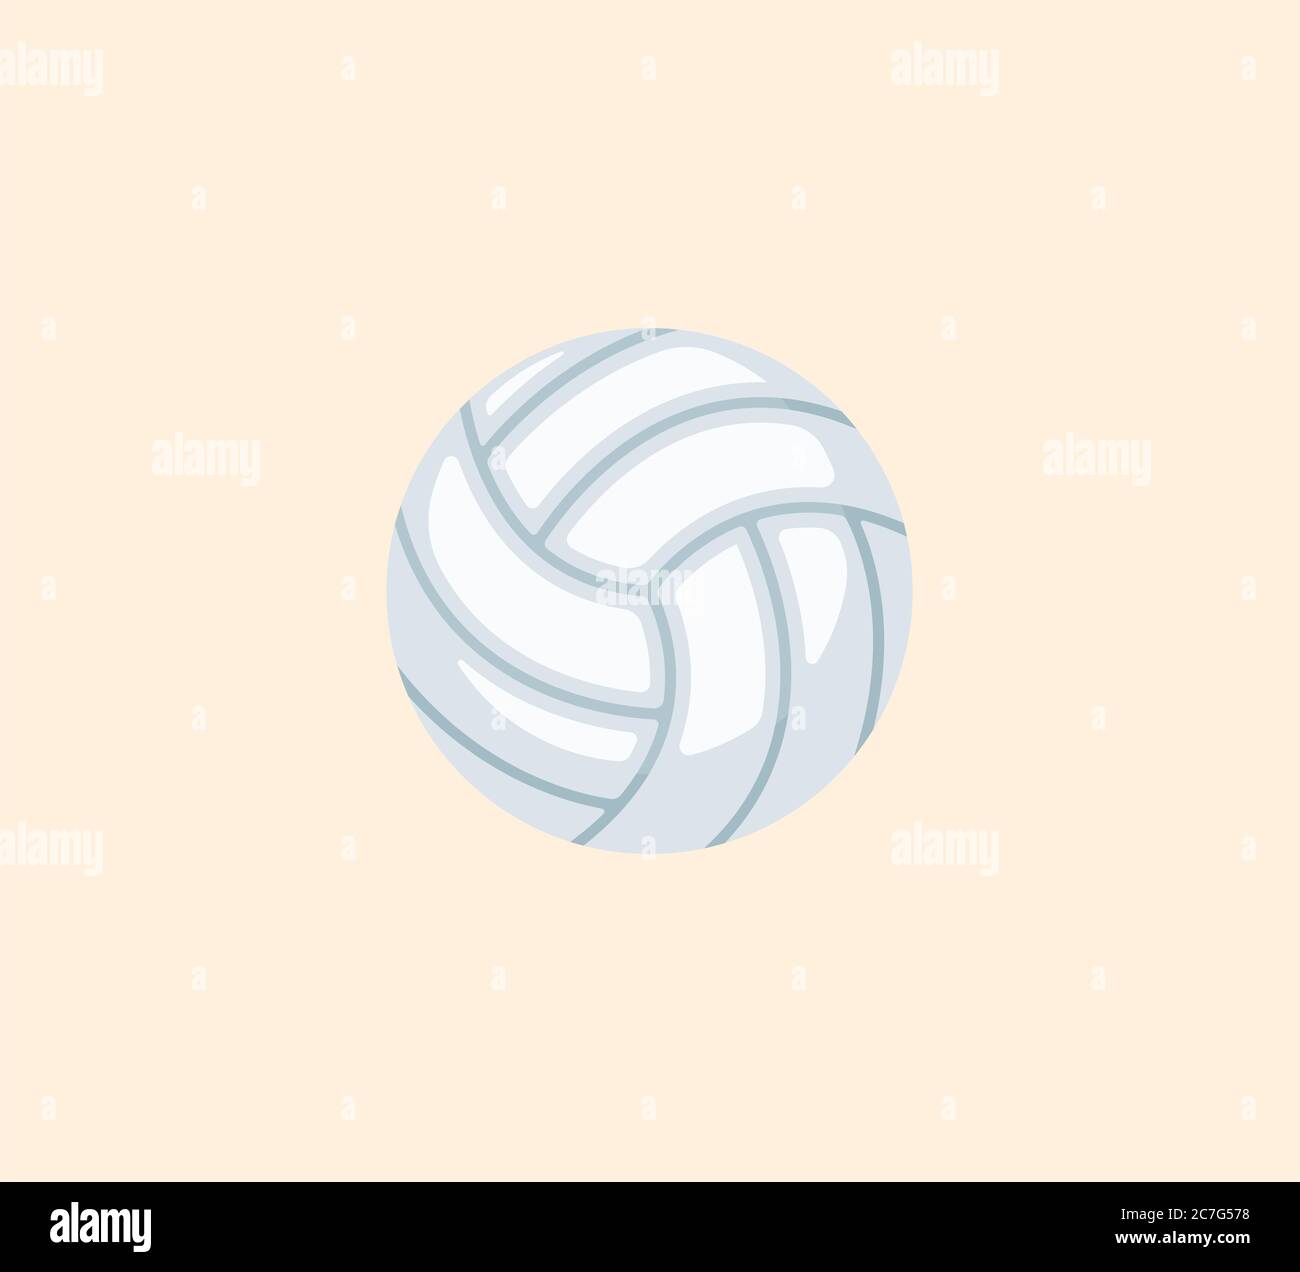 Volleyball ball vector isolated illustration. Volleyball ball icon Stock Vector